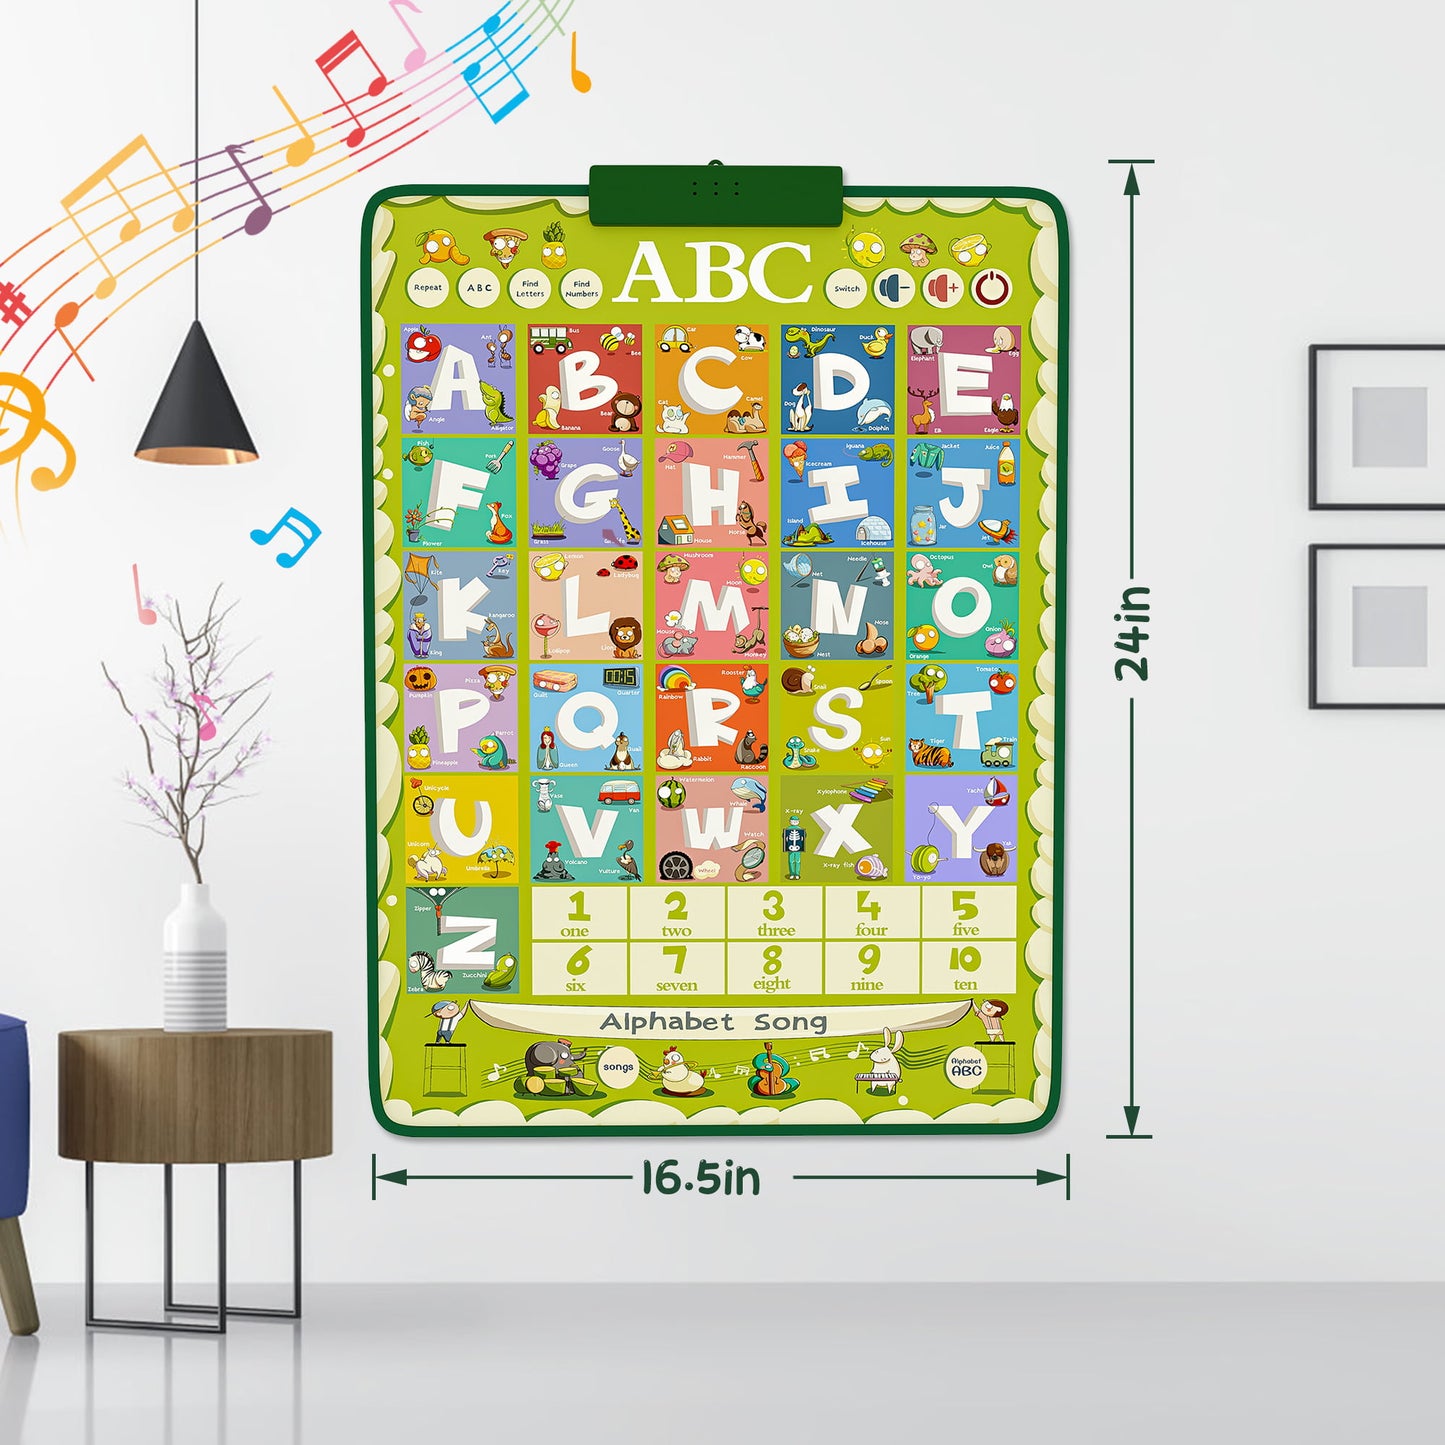 Electronic Alphabet Wall Chart for Kids, 100 Words Interactive Talking ABC&123s, Learning Poster Christmas Birthday Gift for Preschoolers Boys Girls Aged 3 4 5 6+